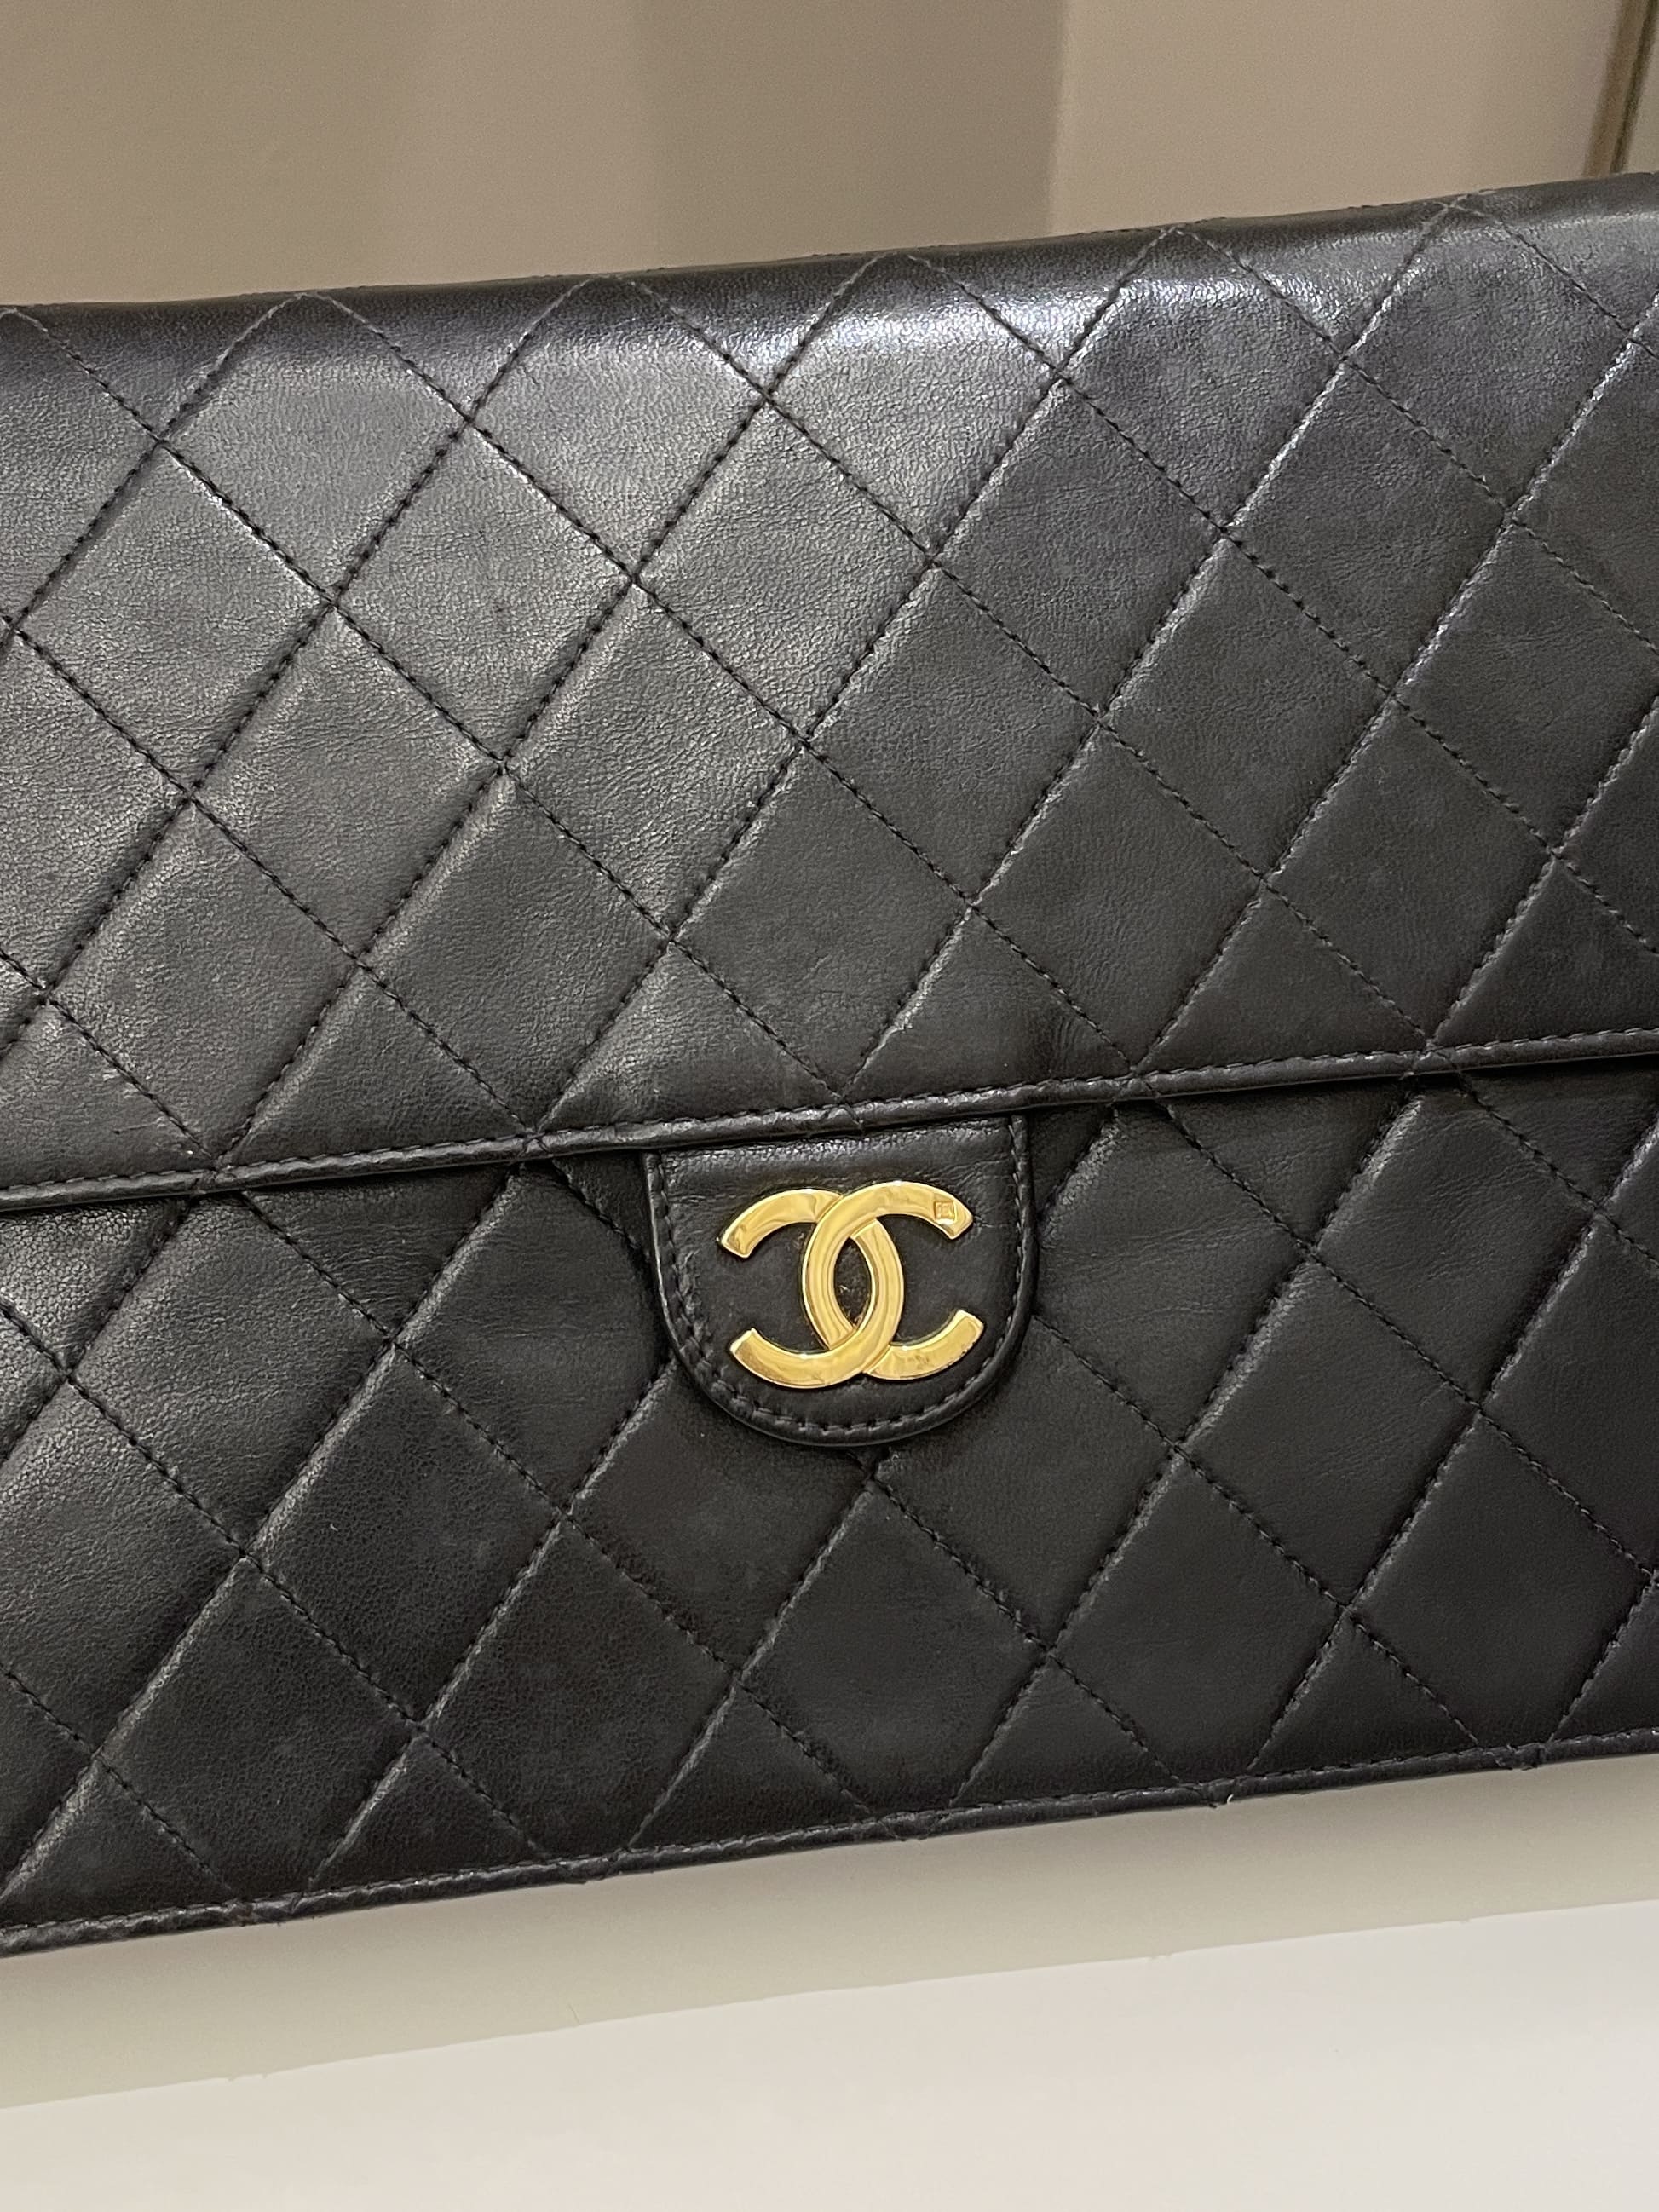 CHANEL Resin Quilted Lambskin Minaudiere Flap Clutch on Chain Black Gold  1204246